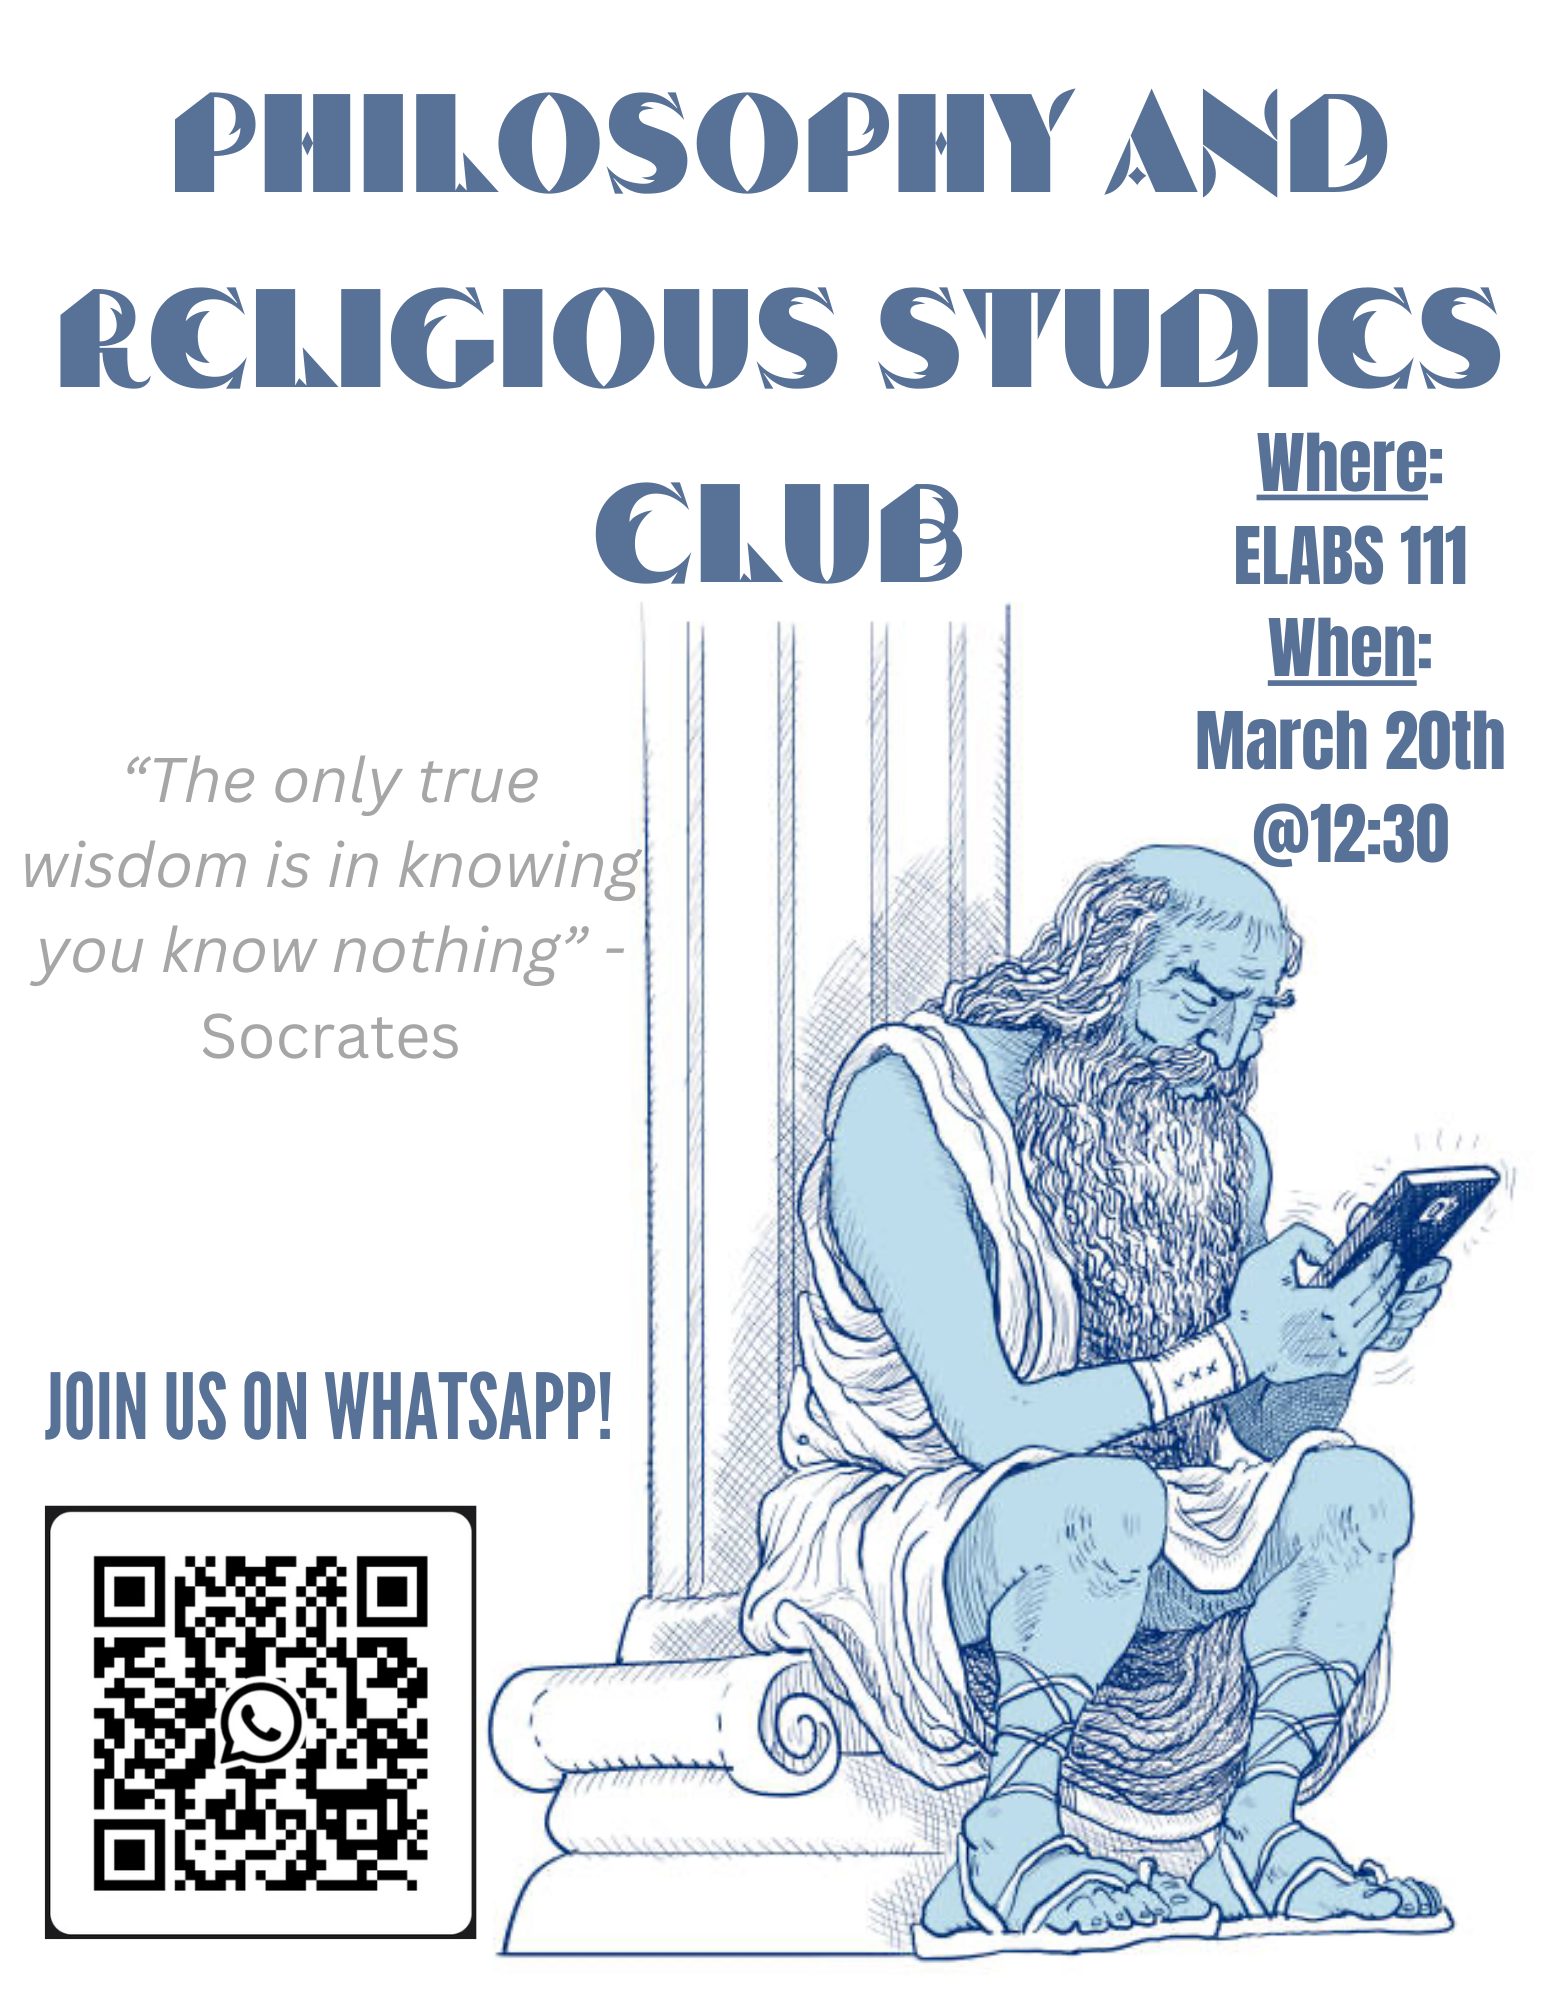 The Edinburg Philosophy and Religious Studies Club meets on Wednesday, March 20th, at 12:30 pm! 